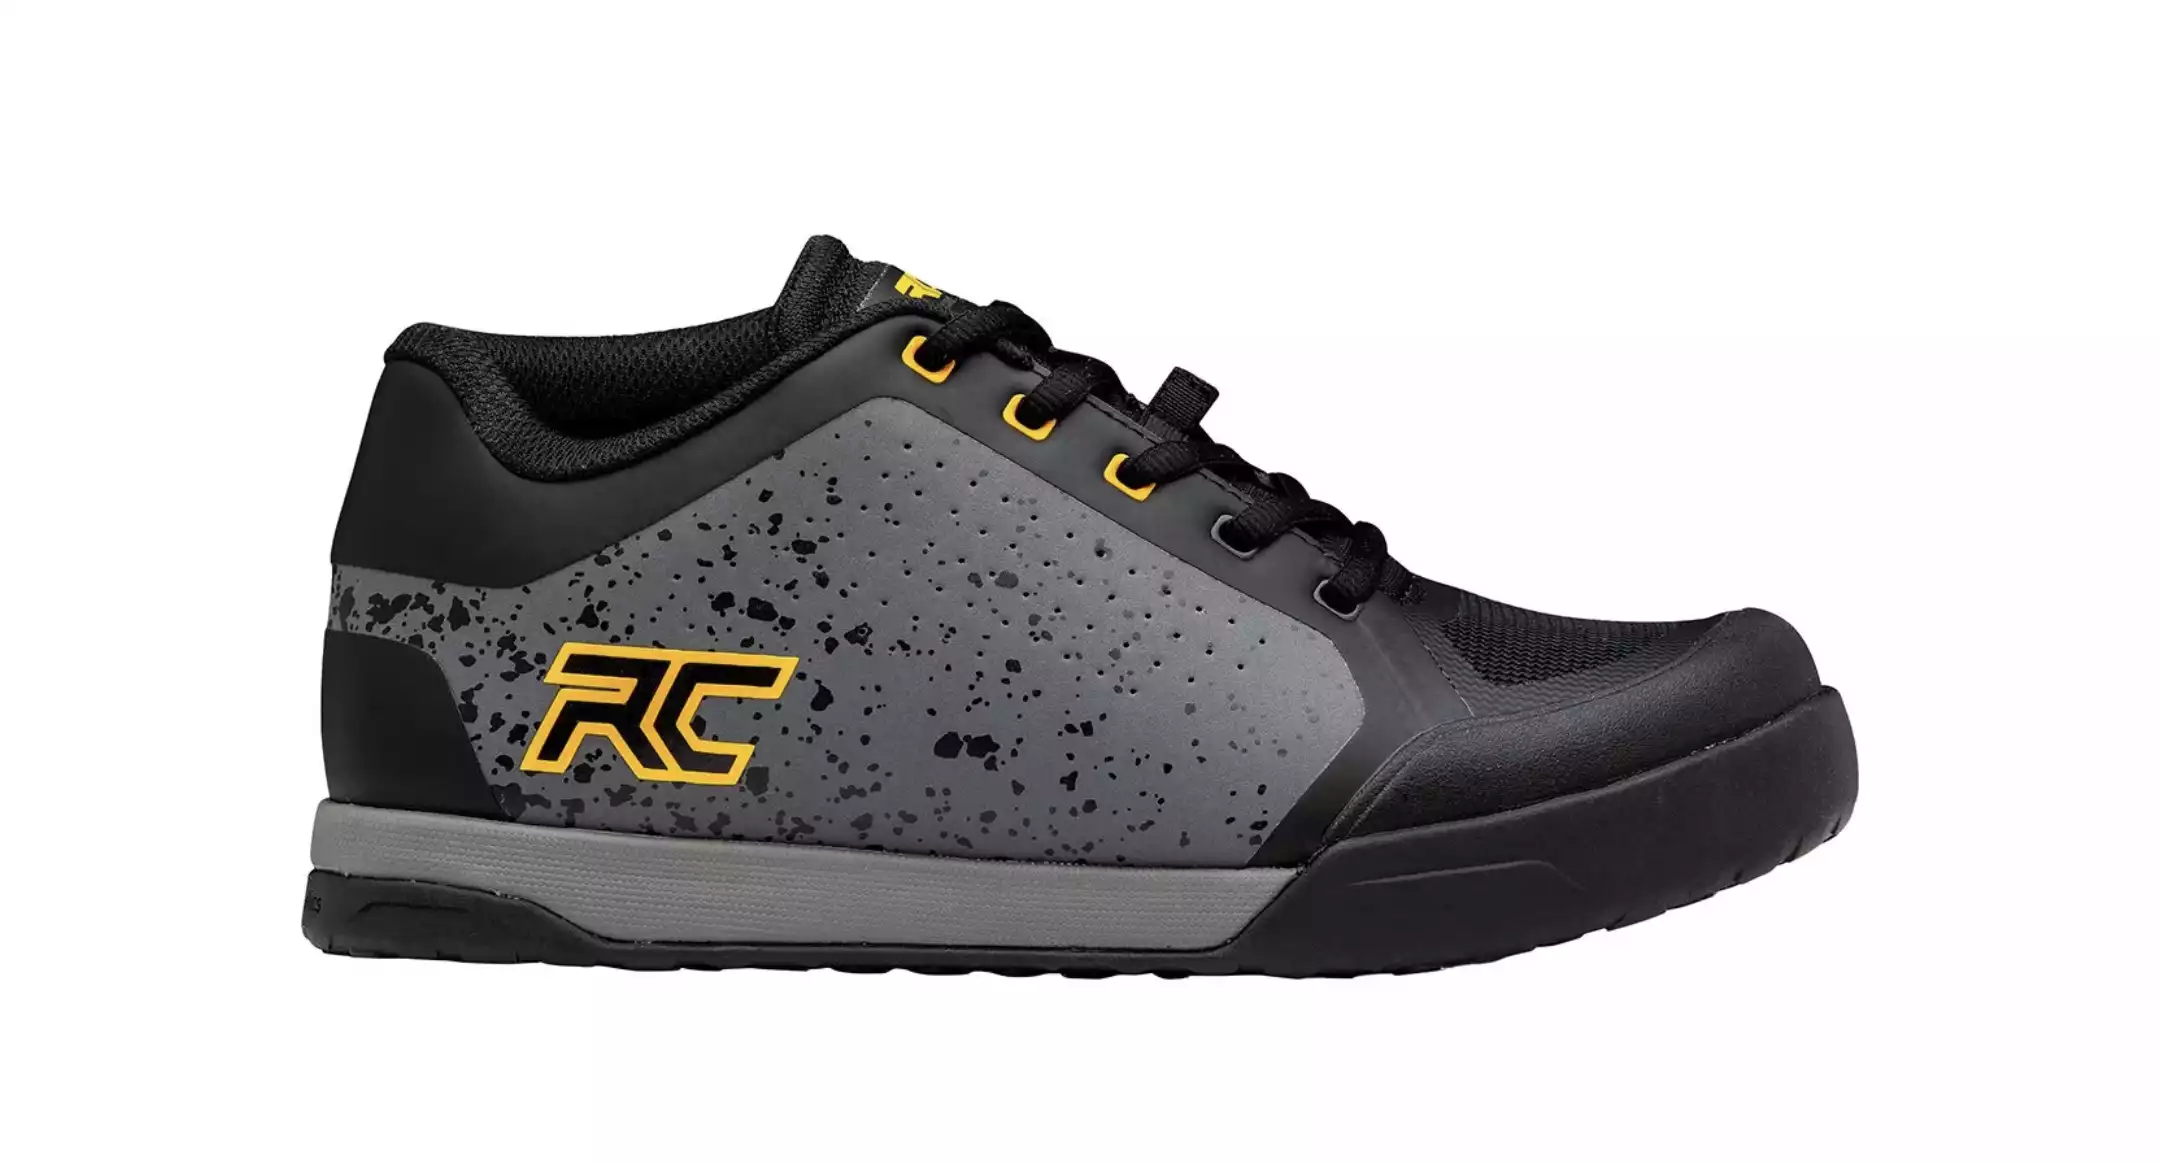 Ride Concept Powerline Cycling Shoe